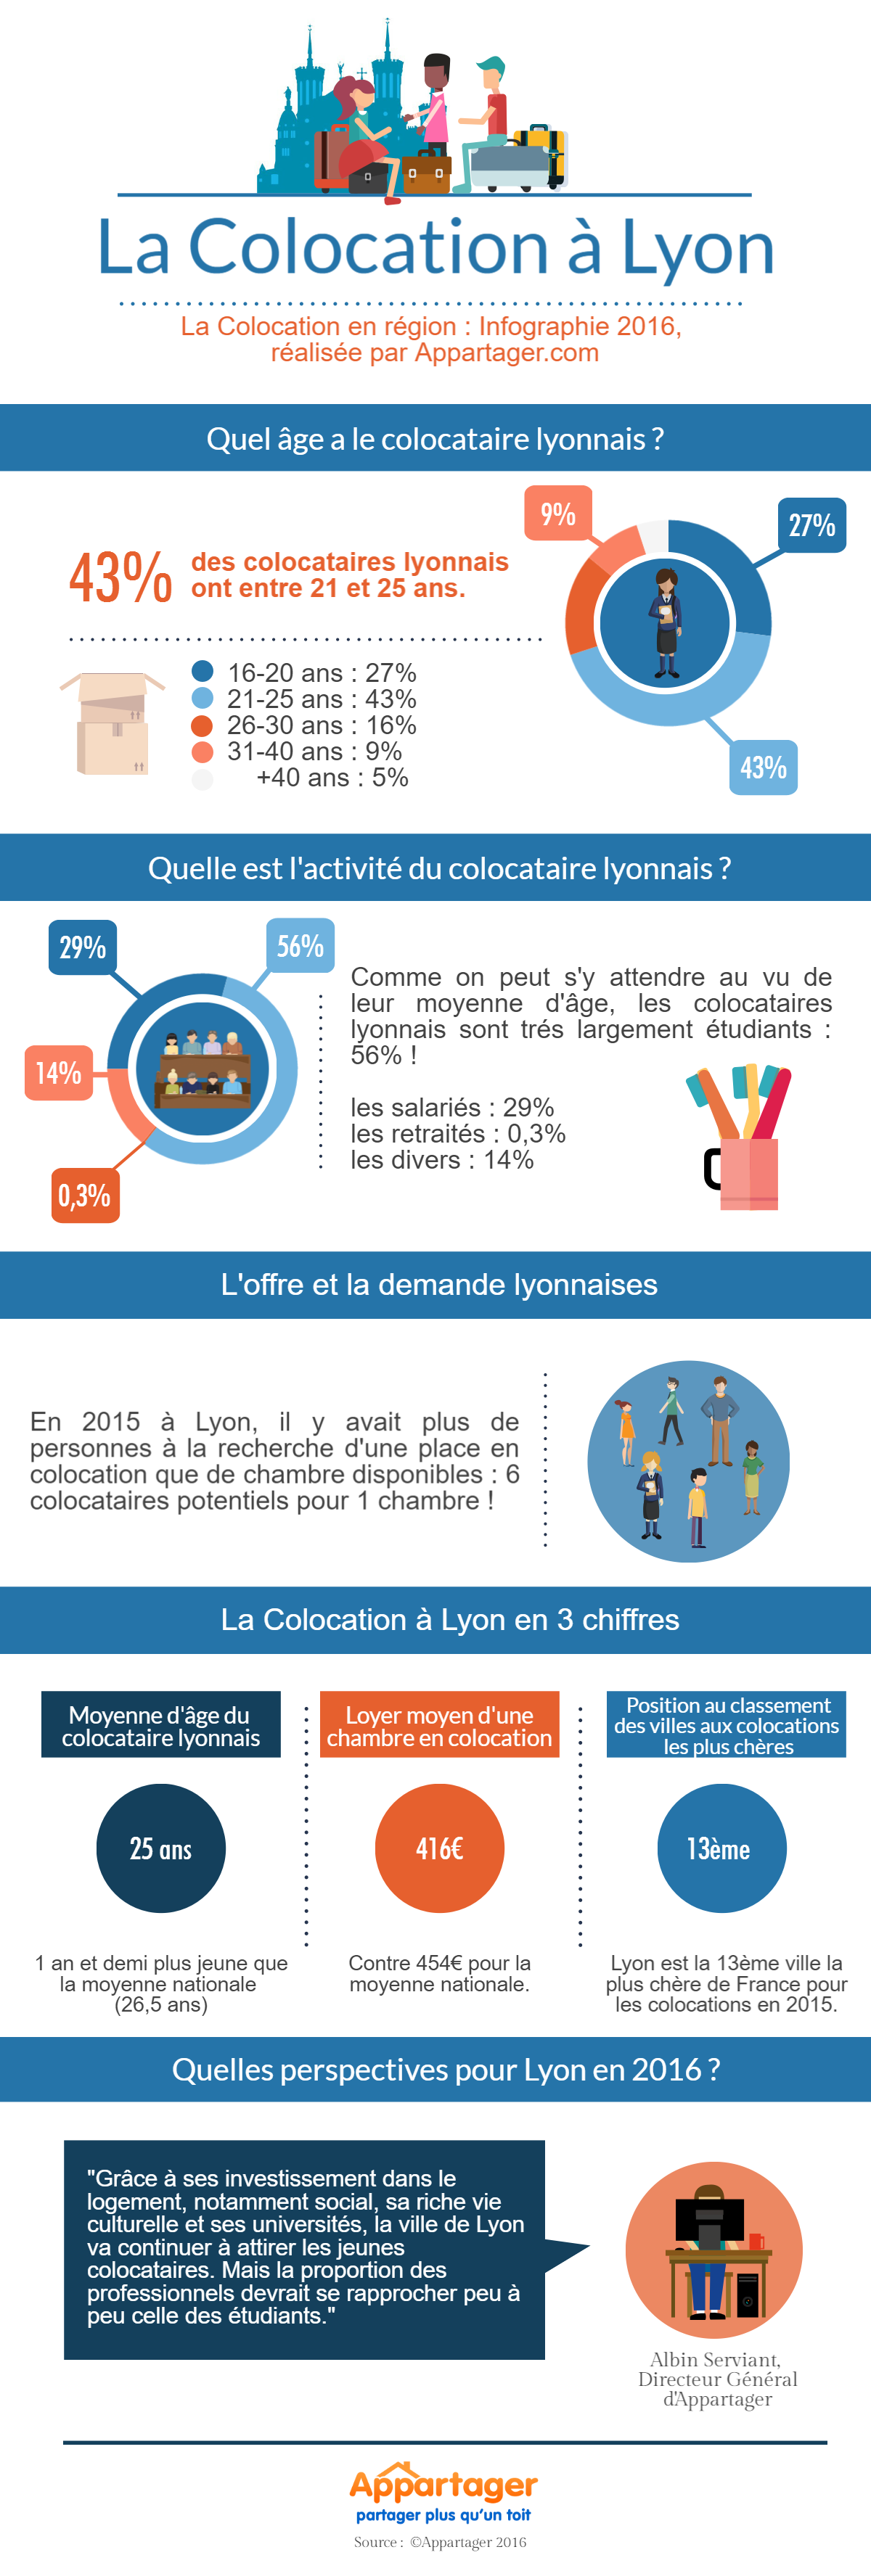 2016.03.31_Appartager_Infographie_colocation-lyon-2016